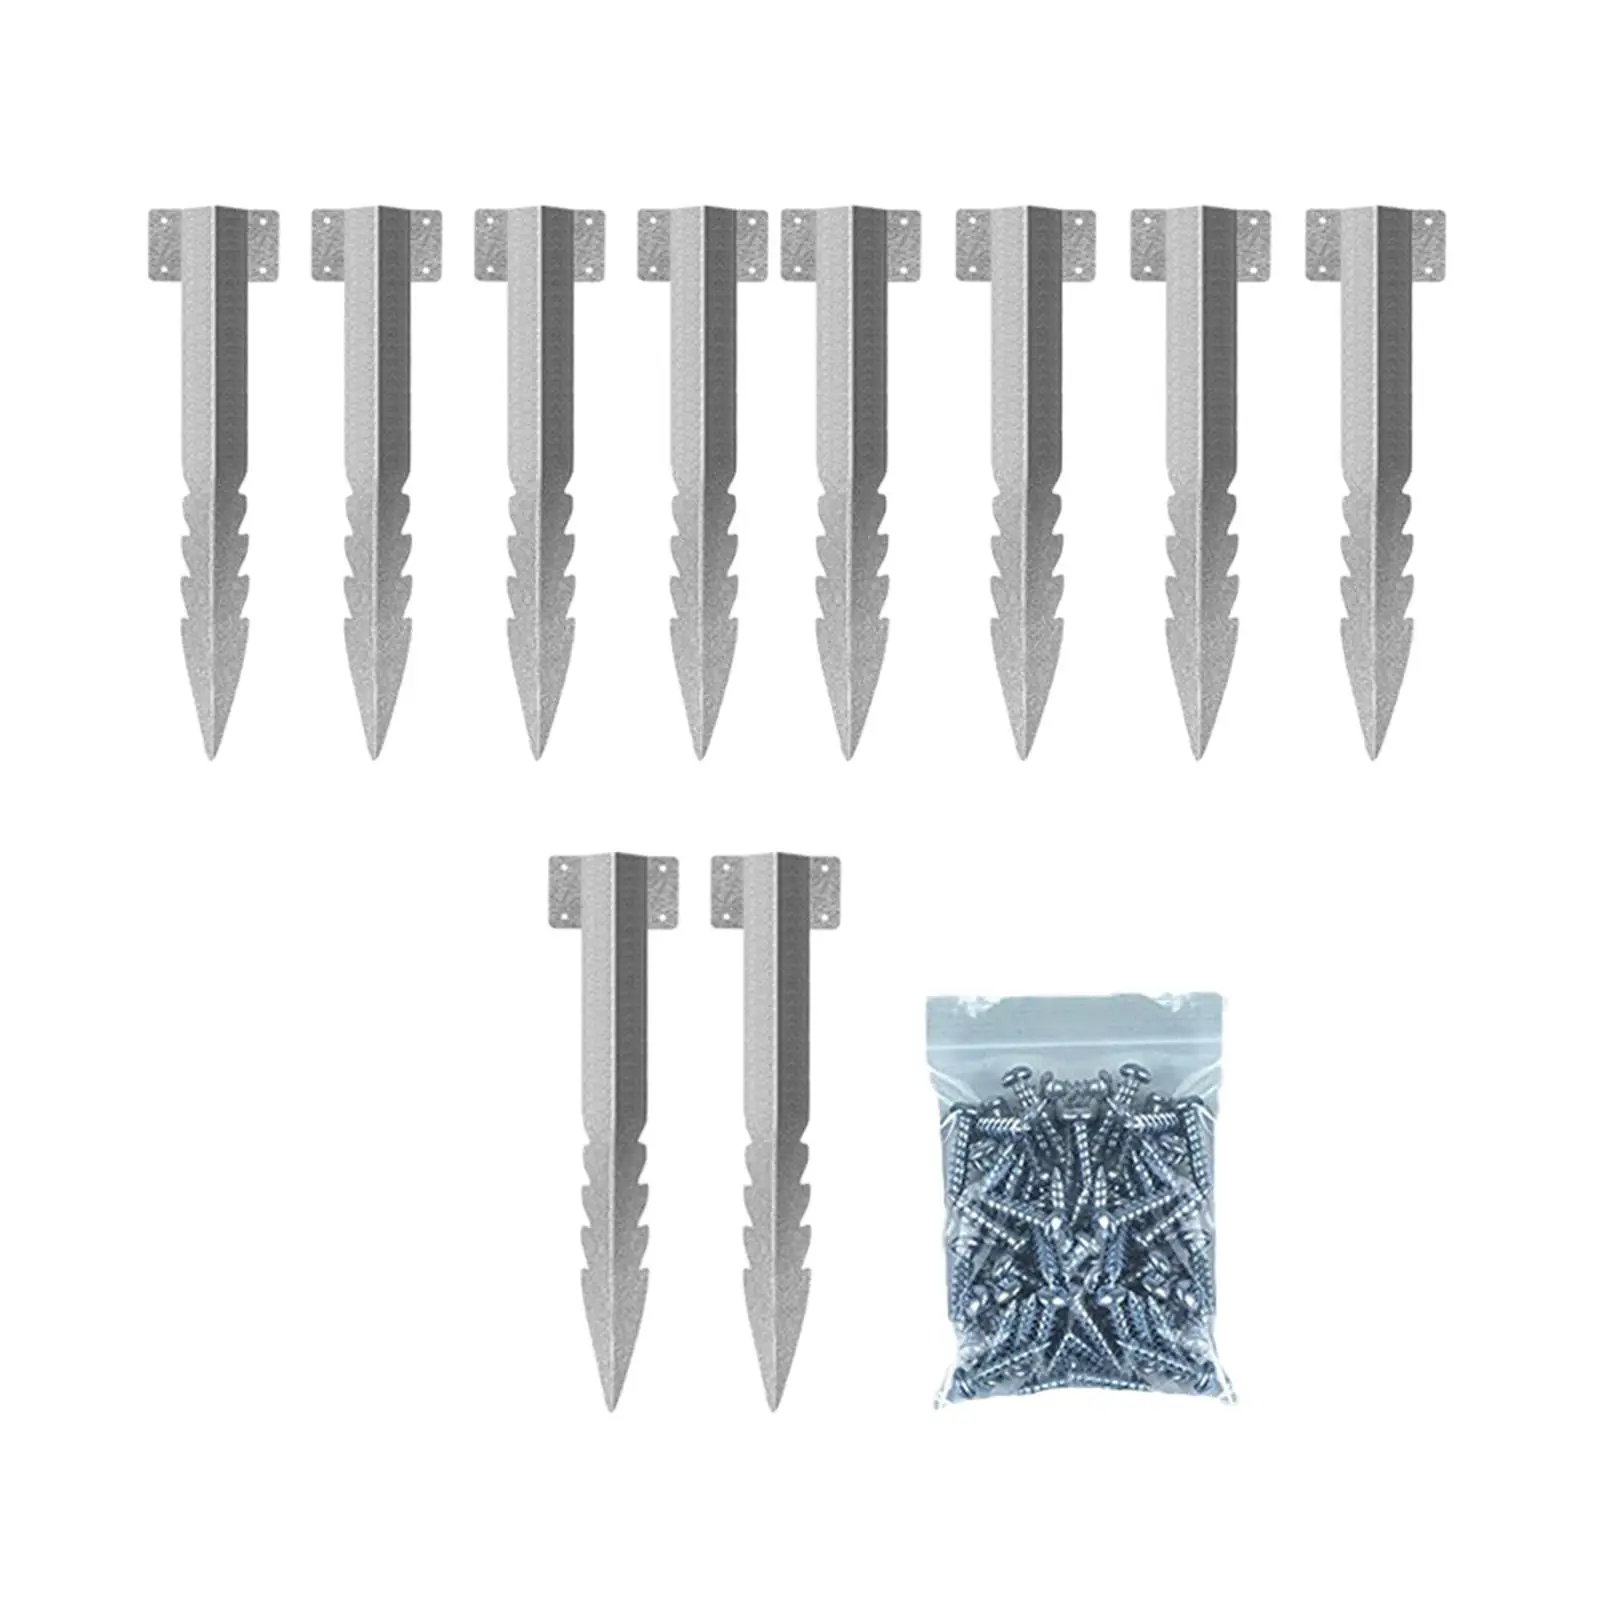 10Pcs Fence Post Repair Kits with Screws Heavy Duty Steel Outdoor Fence Post Fixed Bracket Courtyard Fence Pile Nail Rail